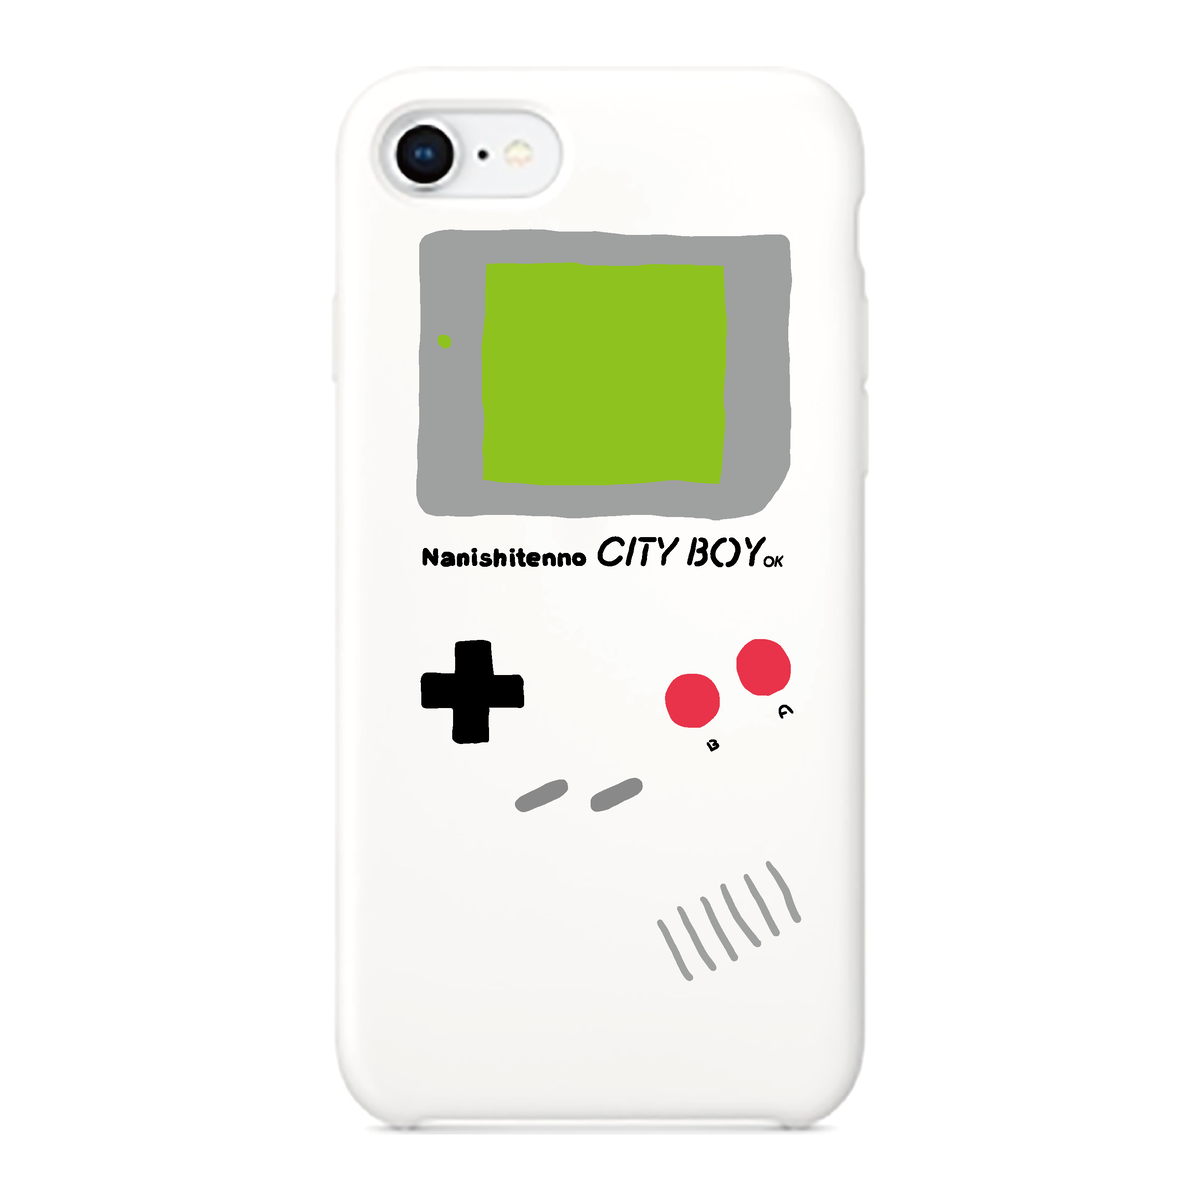 Gameboy カバー For Phone Clearance E93db 047f3